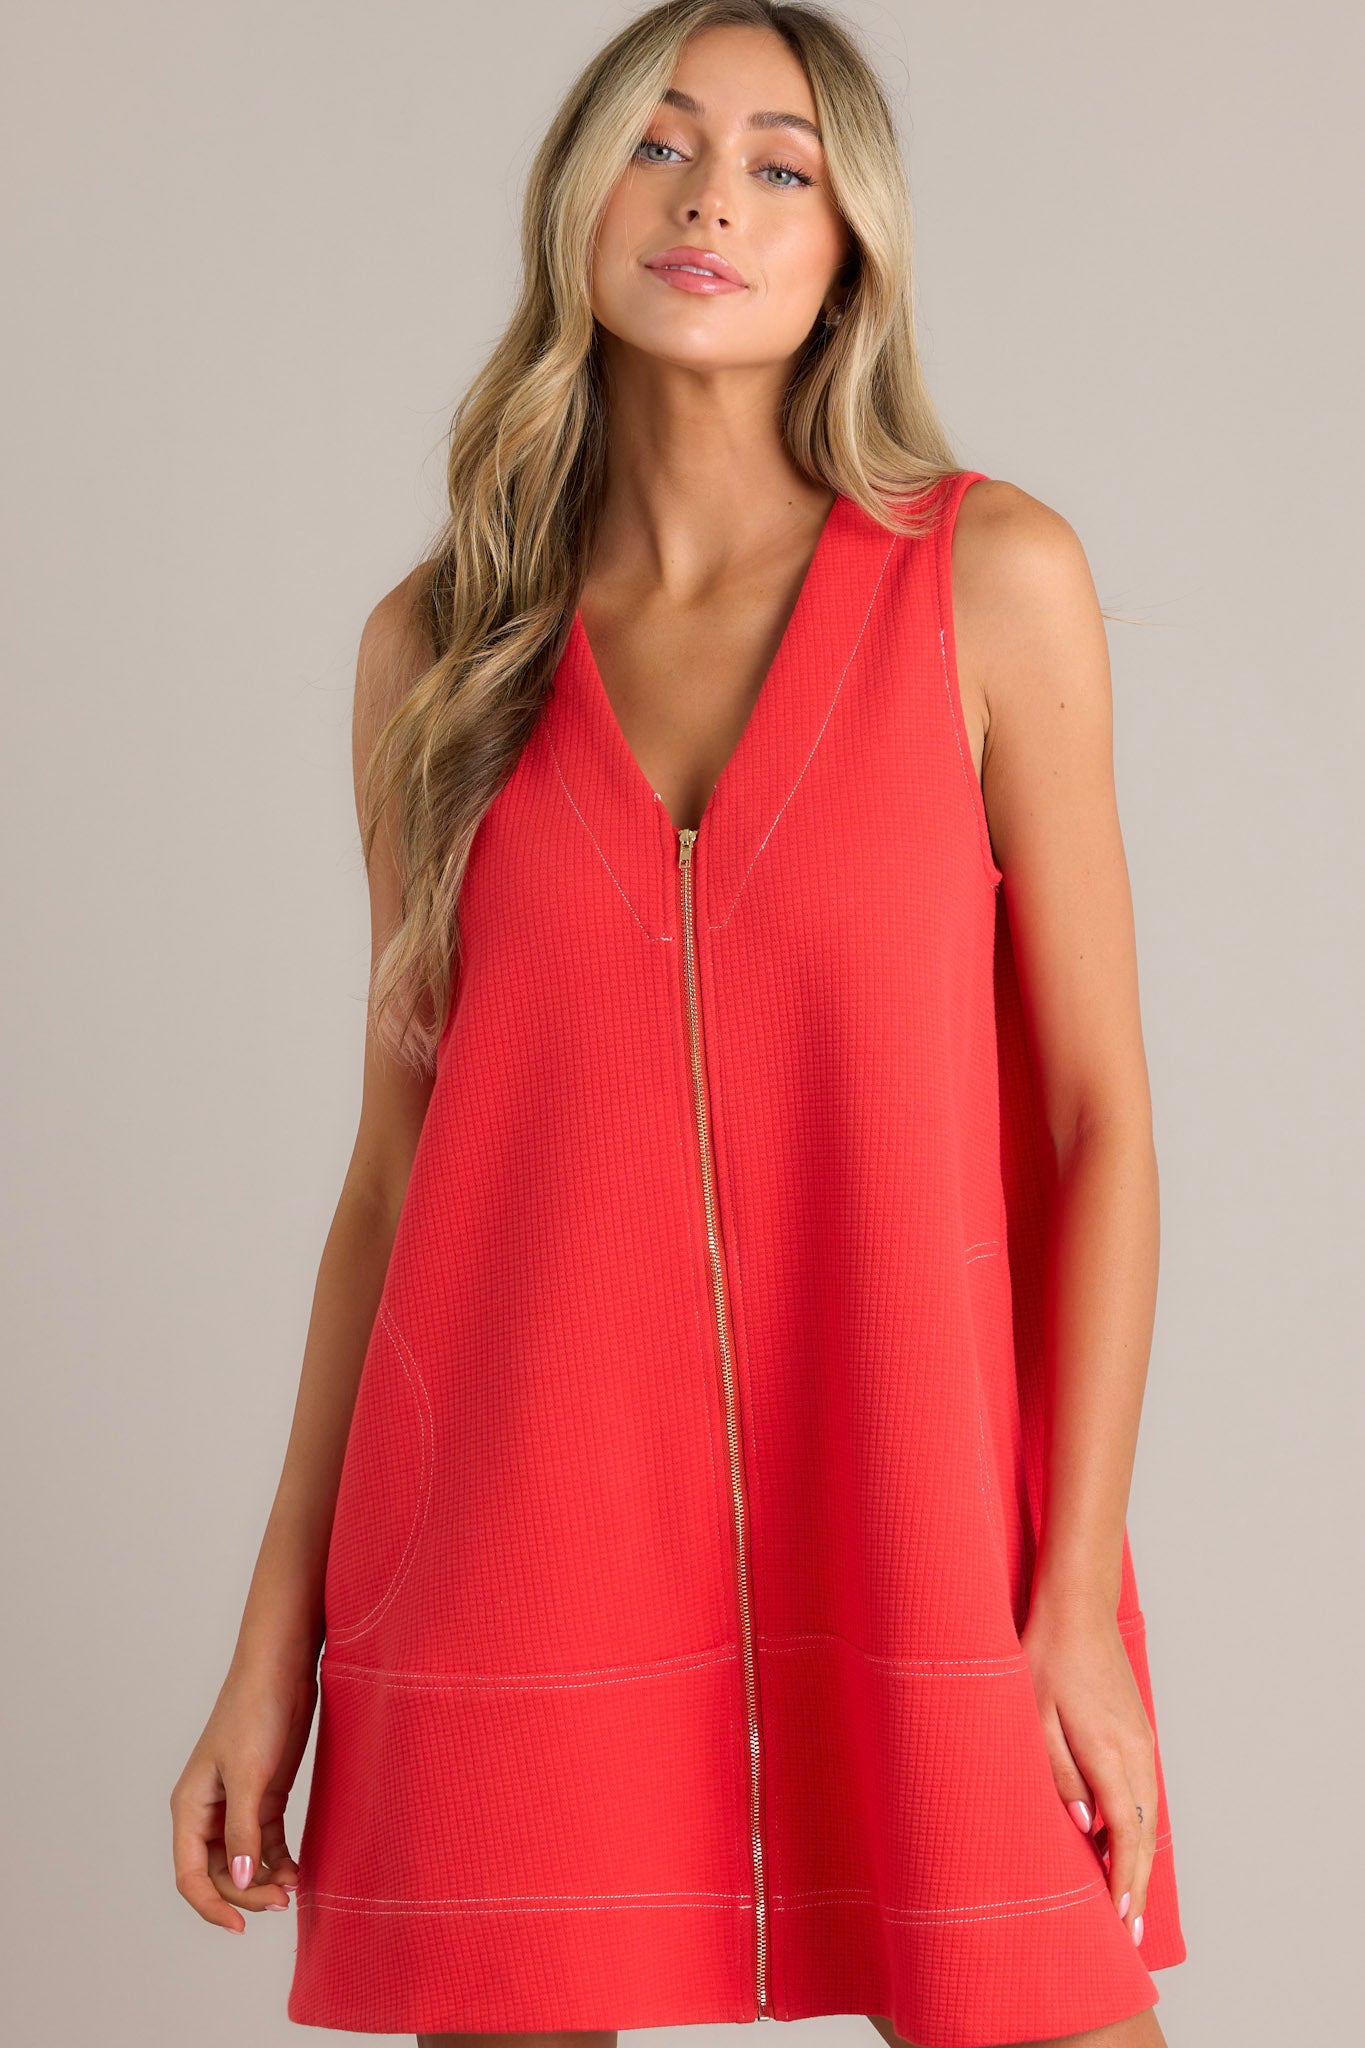 Sleeveless, A-line coral dress with a front zipper detail and two large pockets, featuring a loose and casual fit.